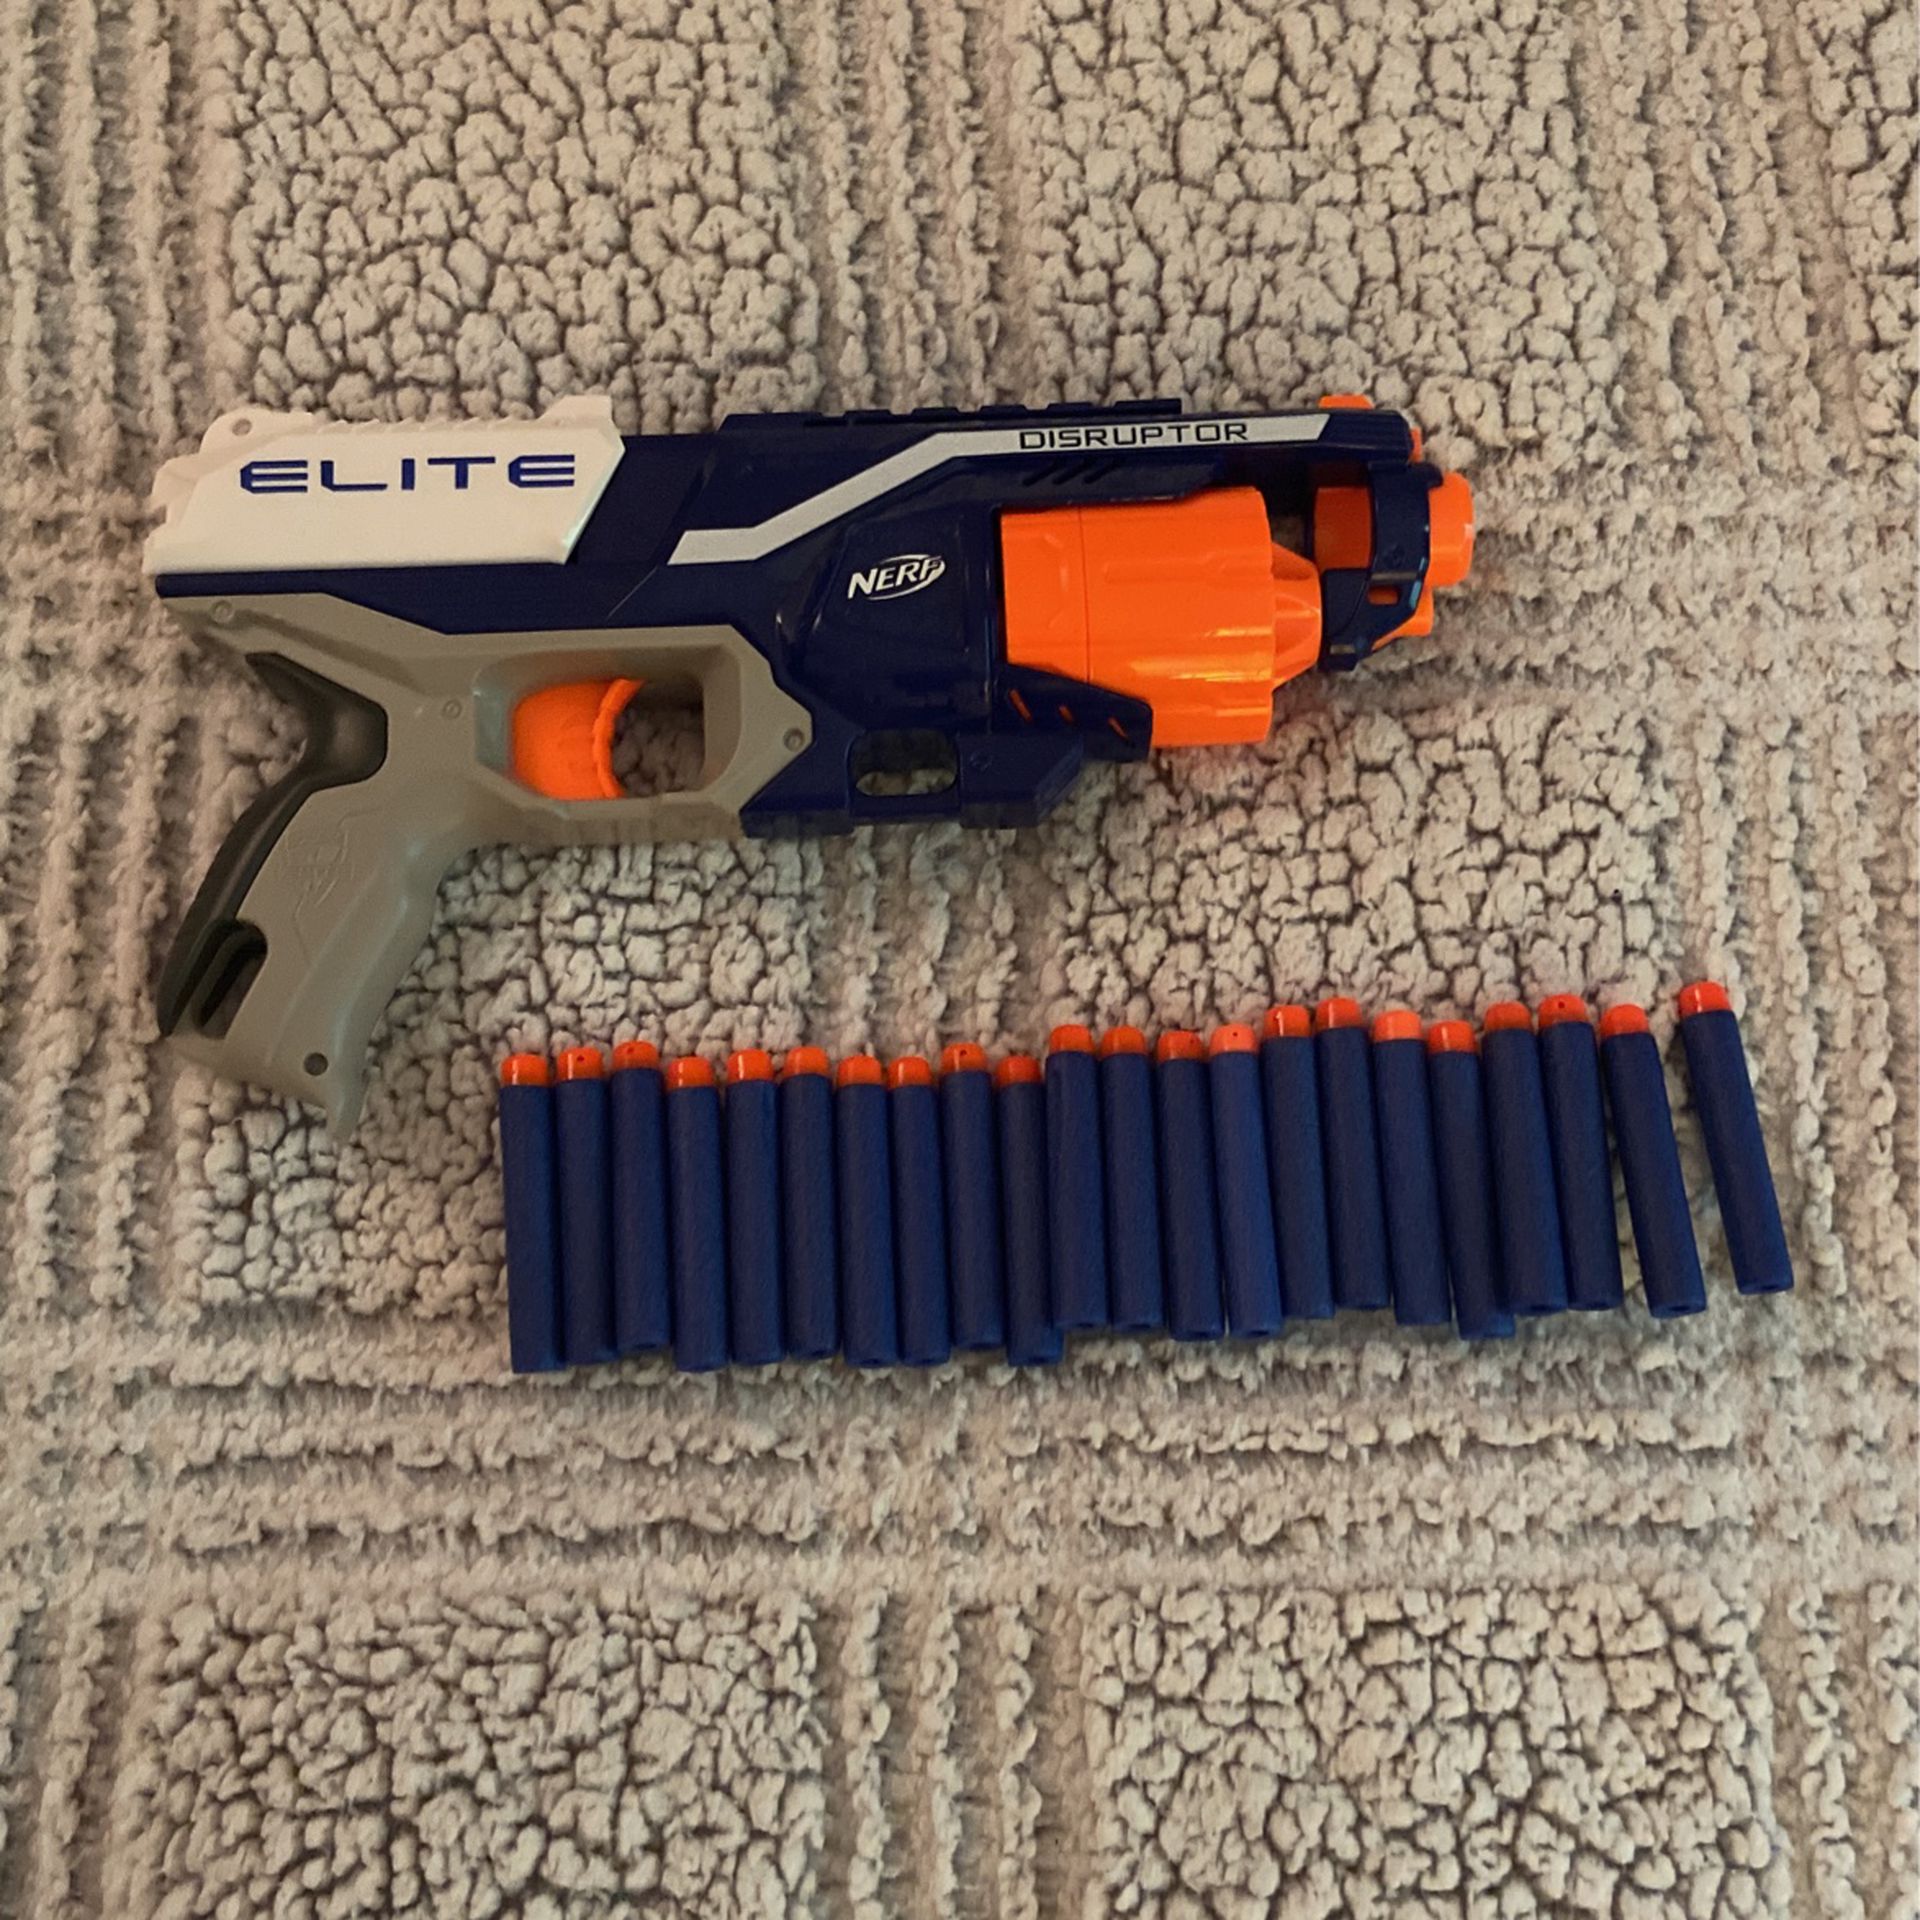 BRAND NEW Nerf Disruptor with 22 never used darts